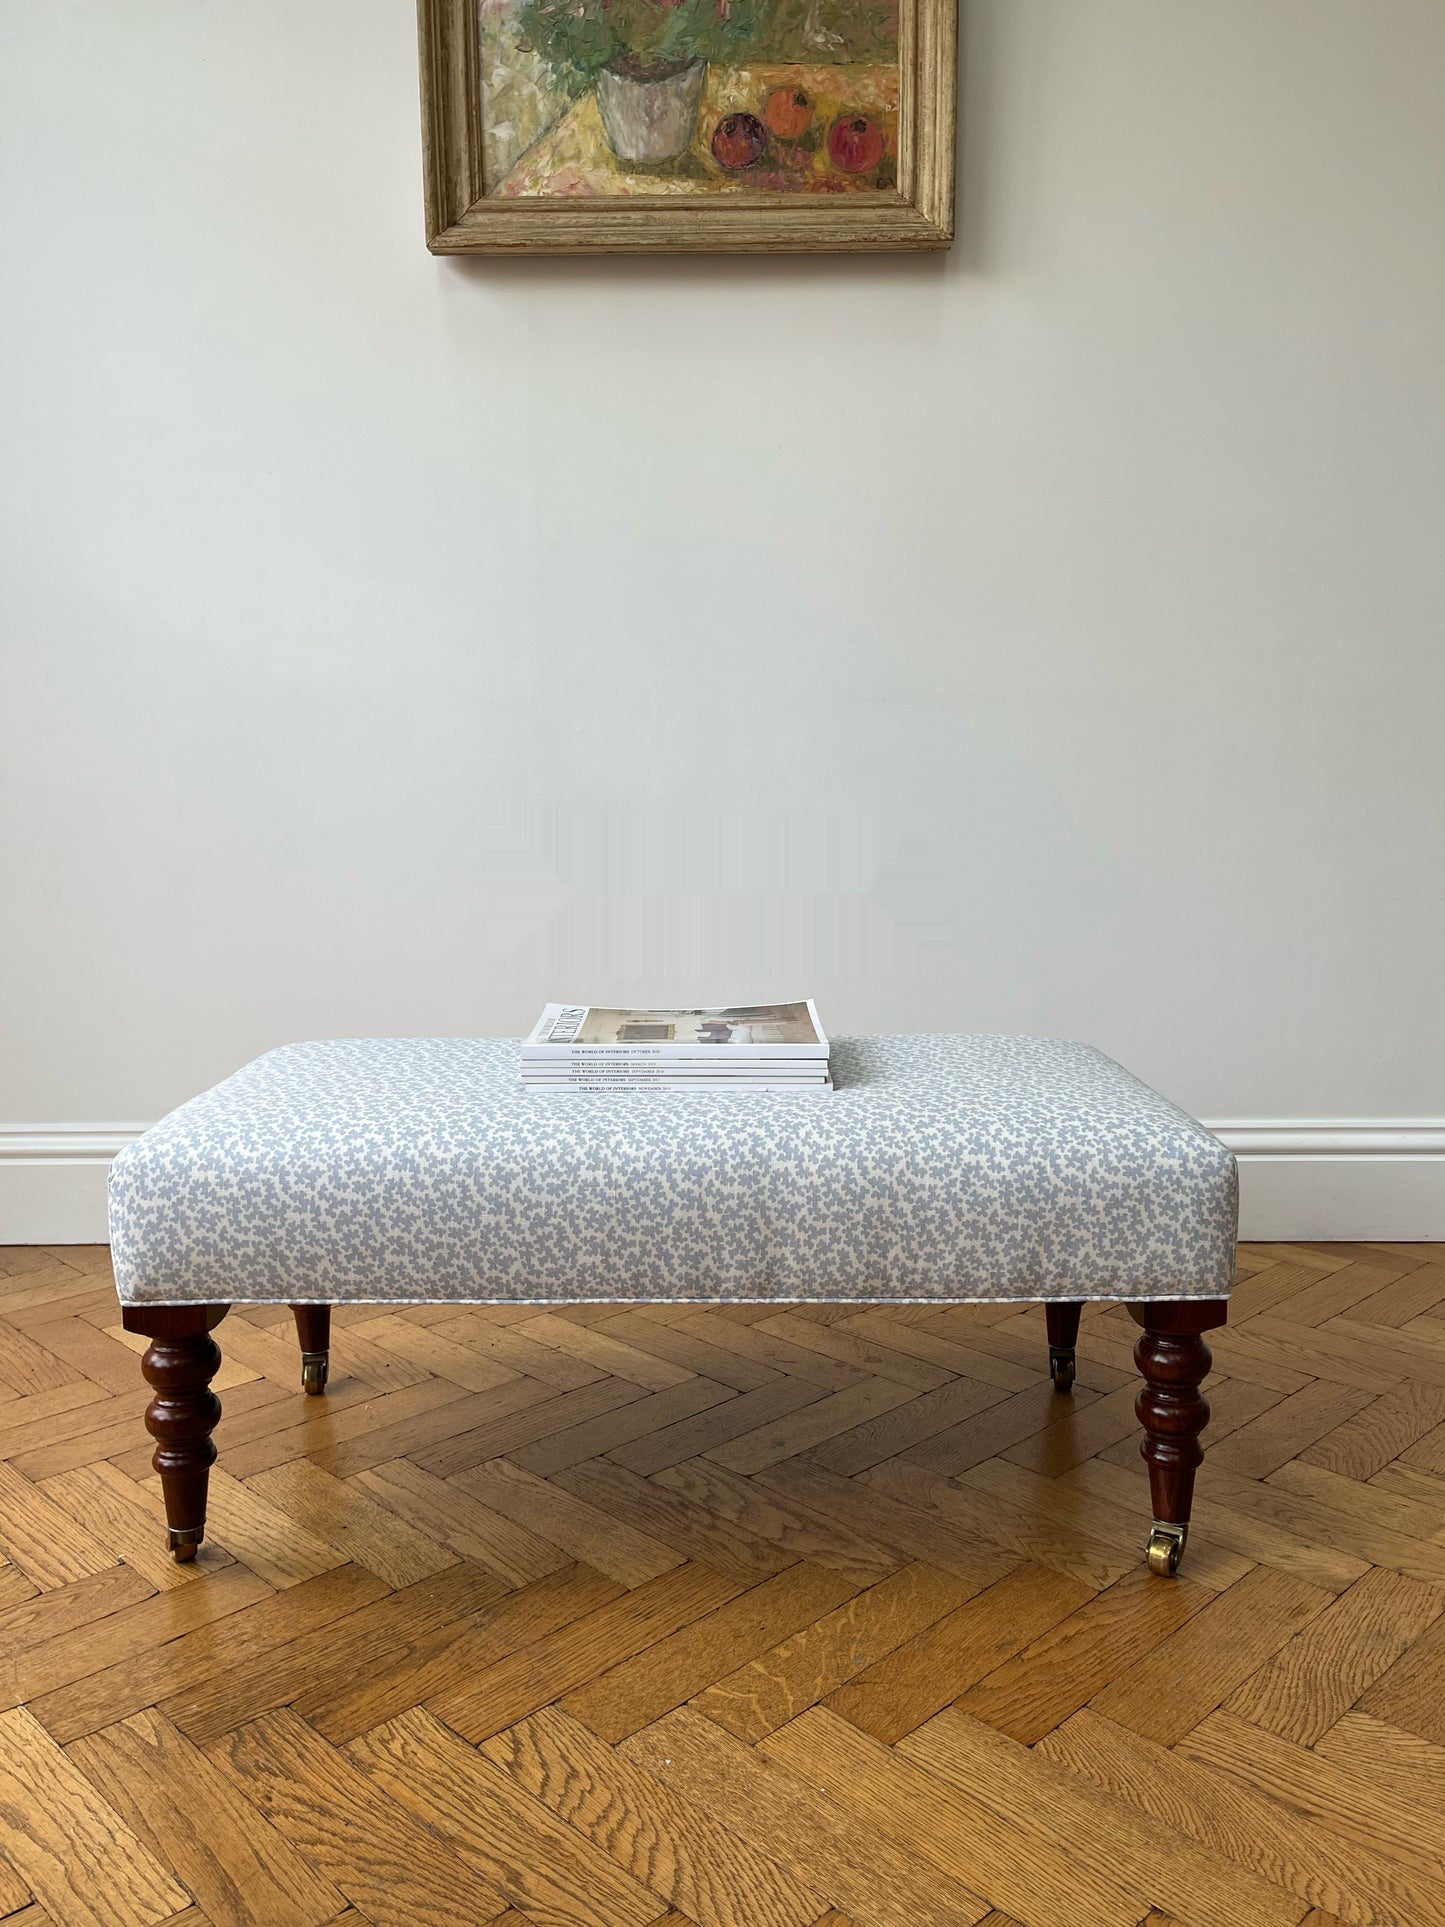 Colefax and Fowler foot stool